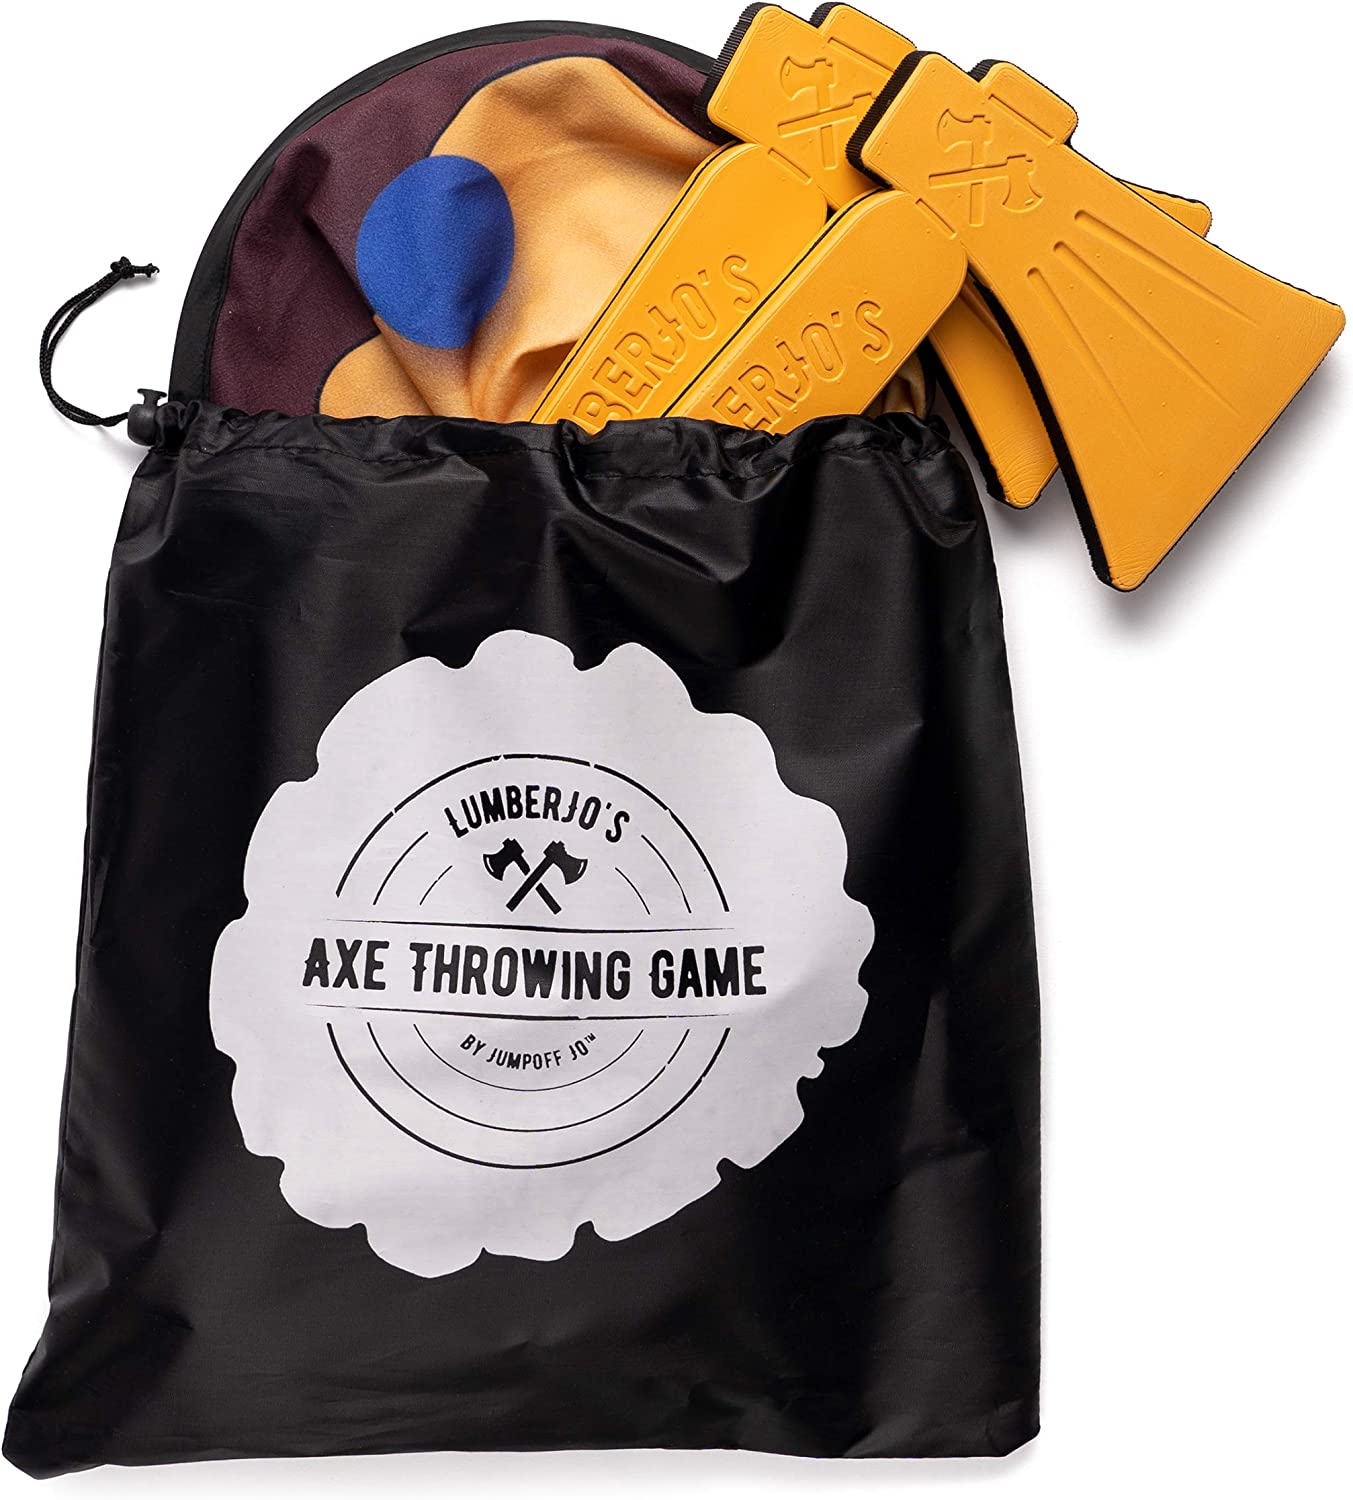 An axe throwing game packed up in a black bag. On the bag there is text which reads, "Axe throwing game".